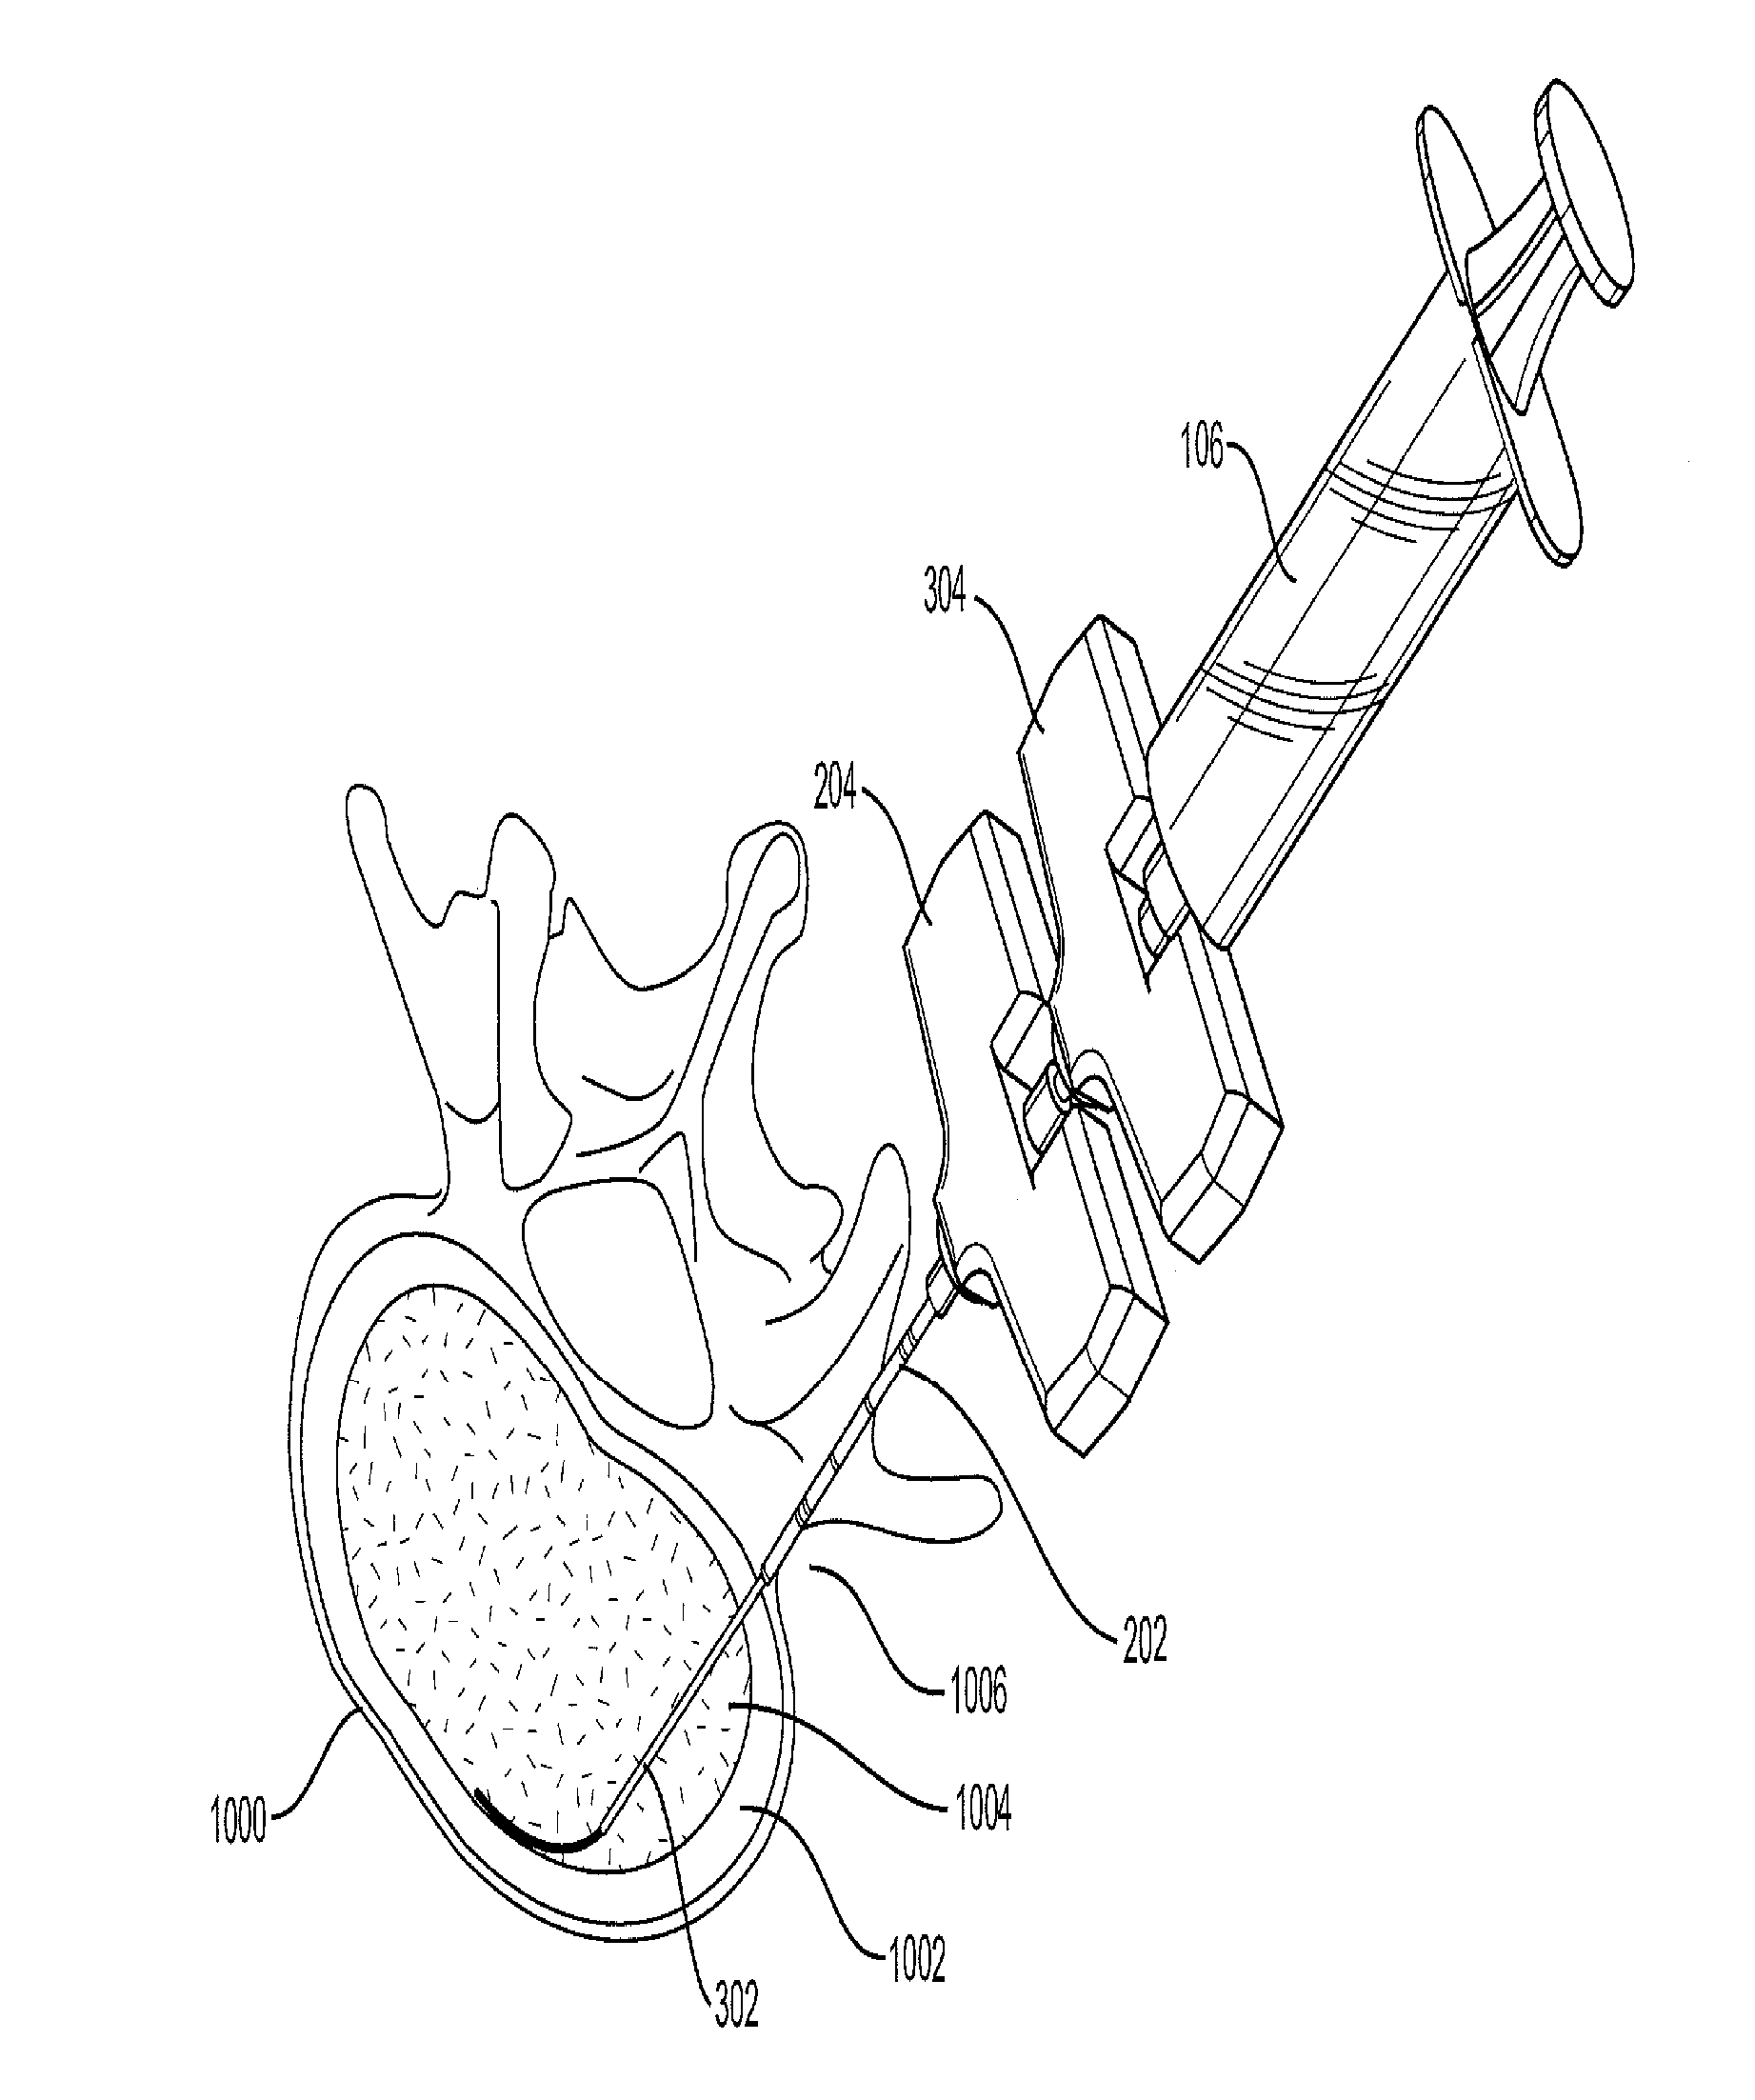 Apparatus and Methods for Aspirating Tissue